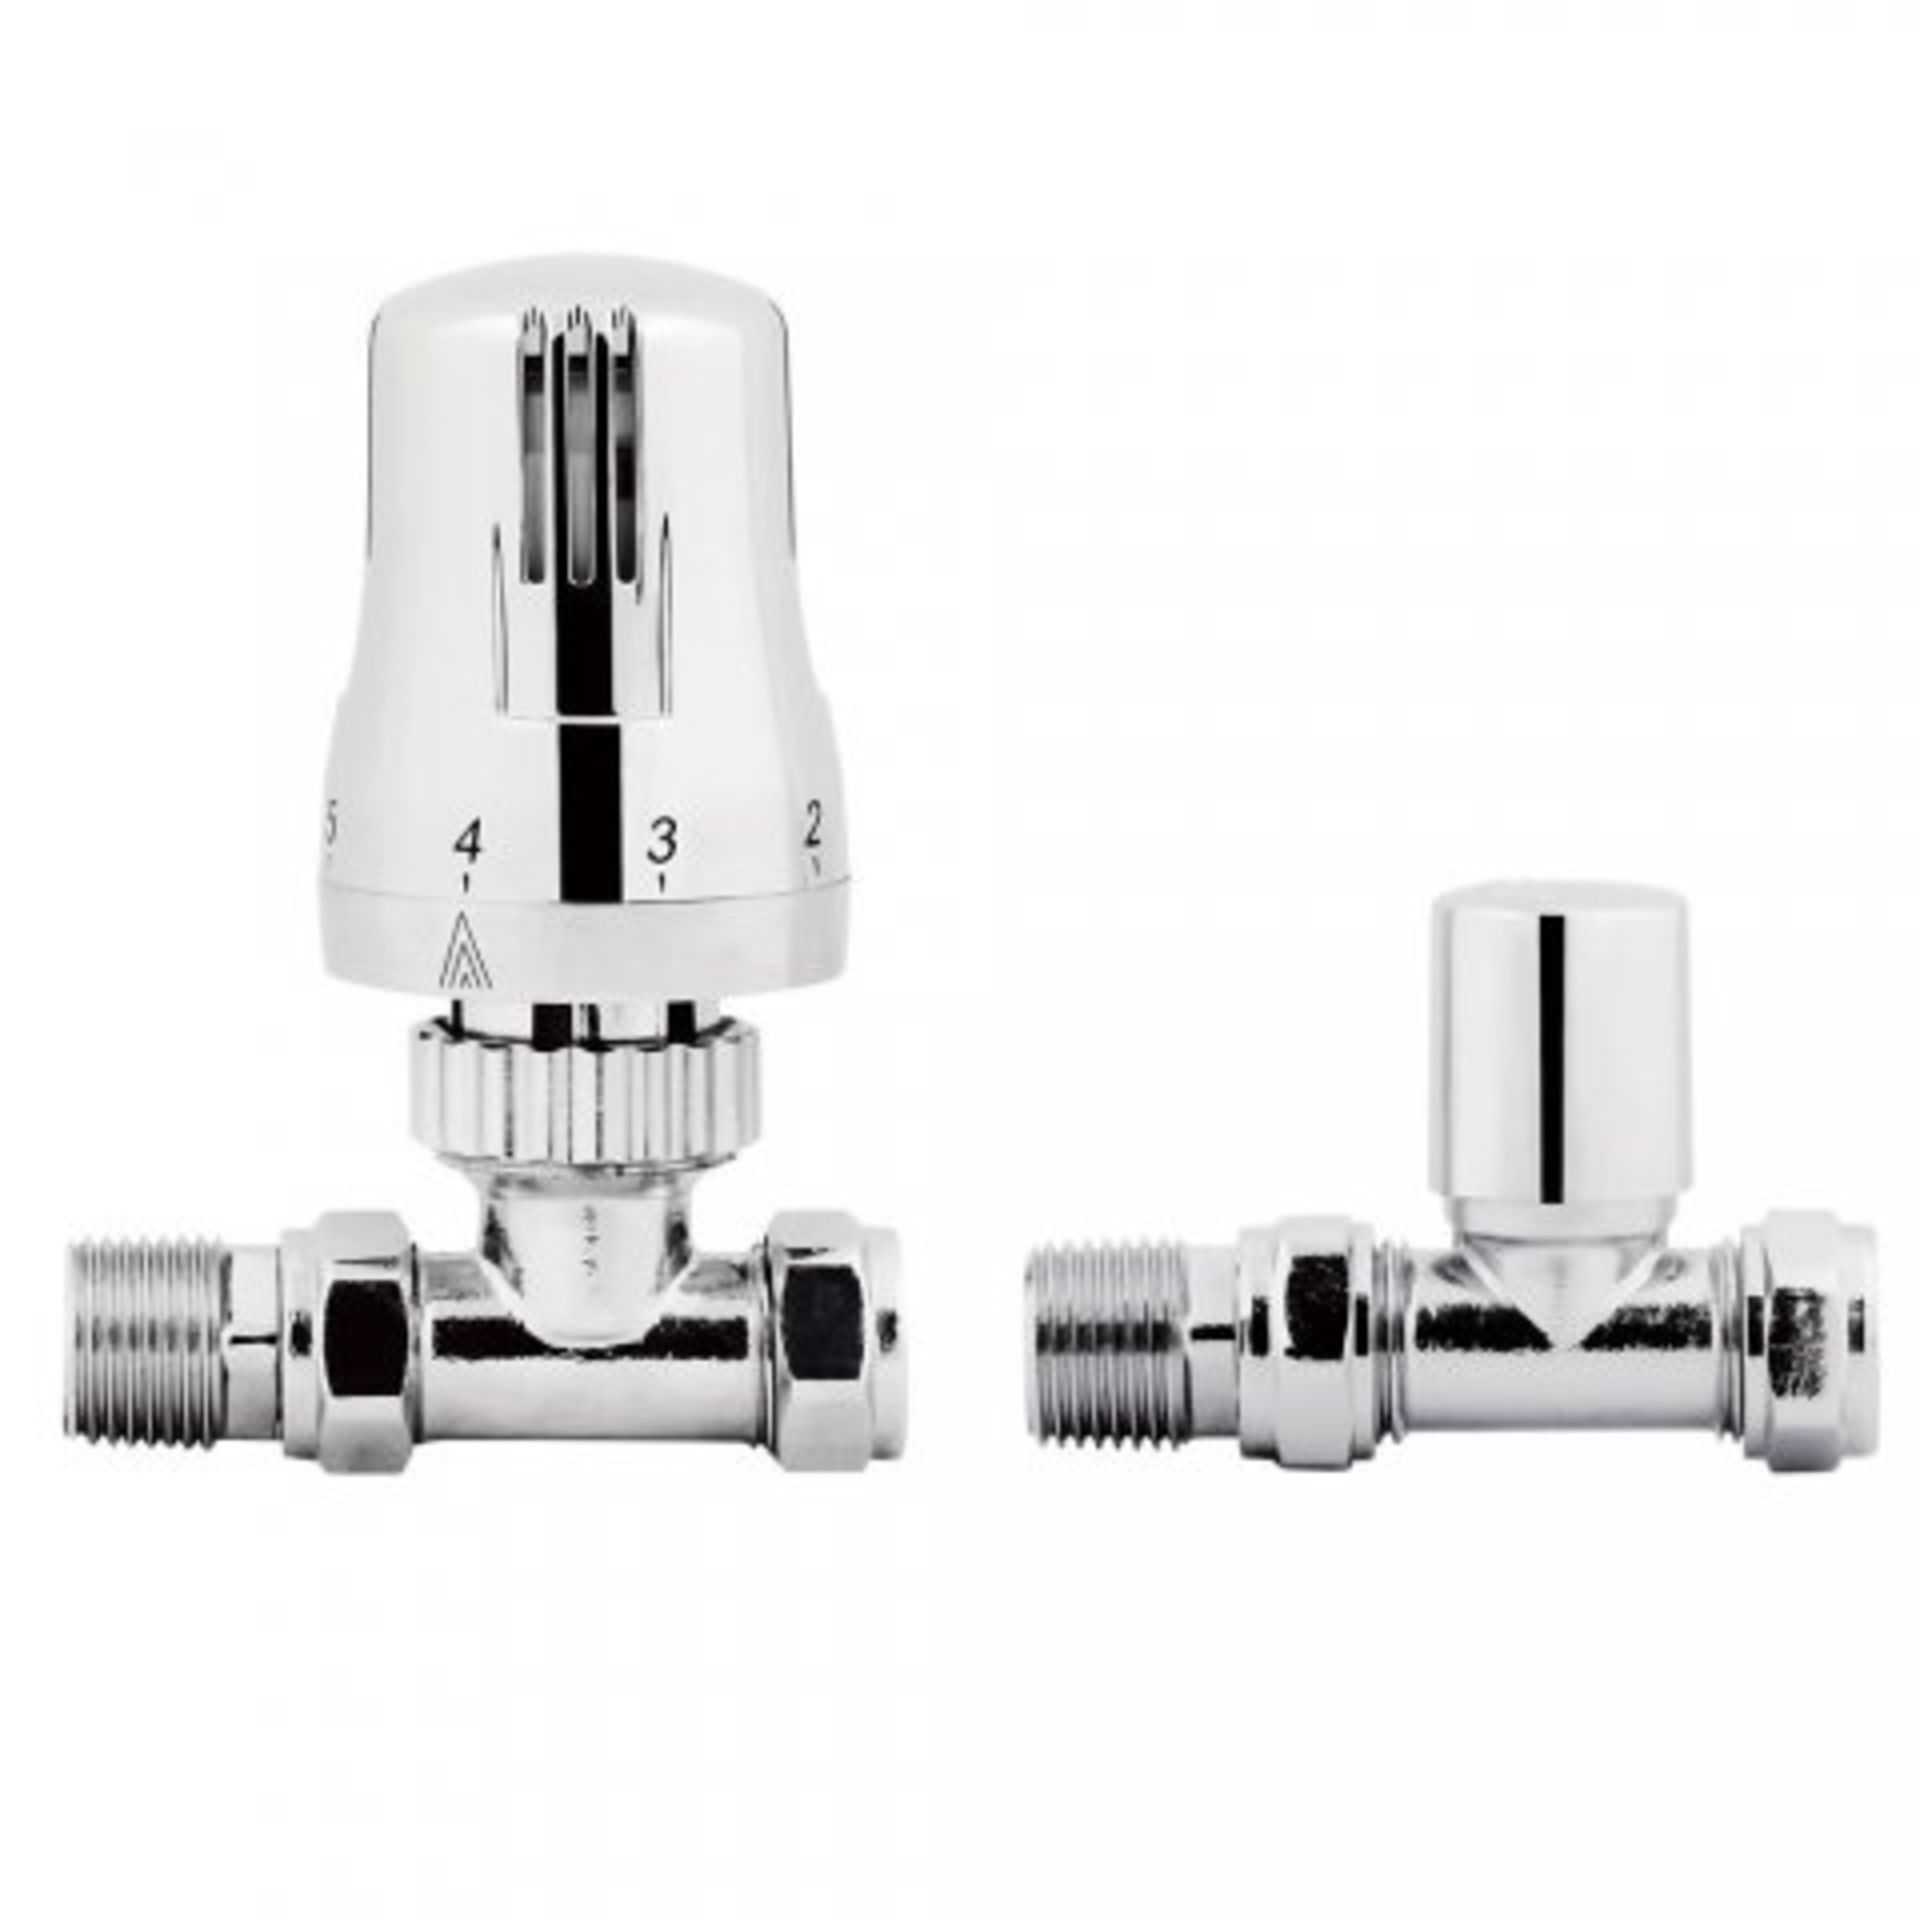 (P72) 15mm Standard Connection Thermostatic Straight Chrome Radiator Valves Made of solid brass, our